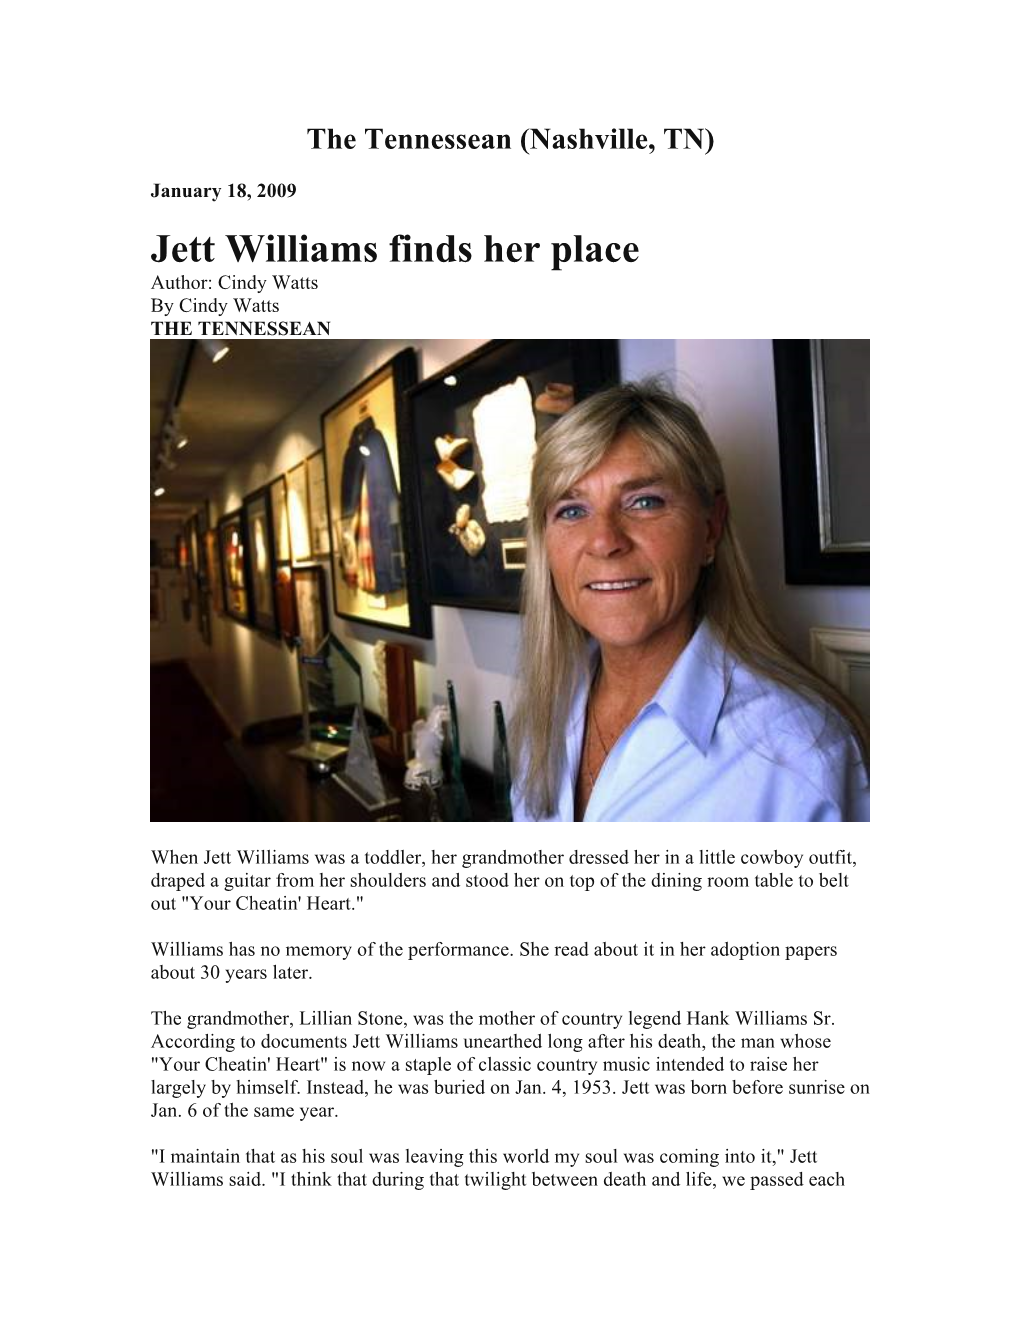 Jett Williams Finds Her Place Author: Cindy Watts by Cindy Watts the TENNESSEAN